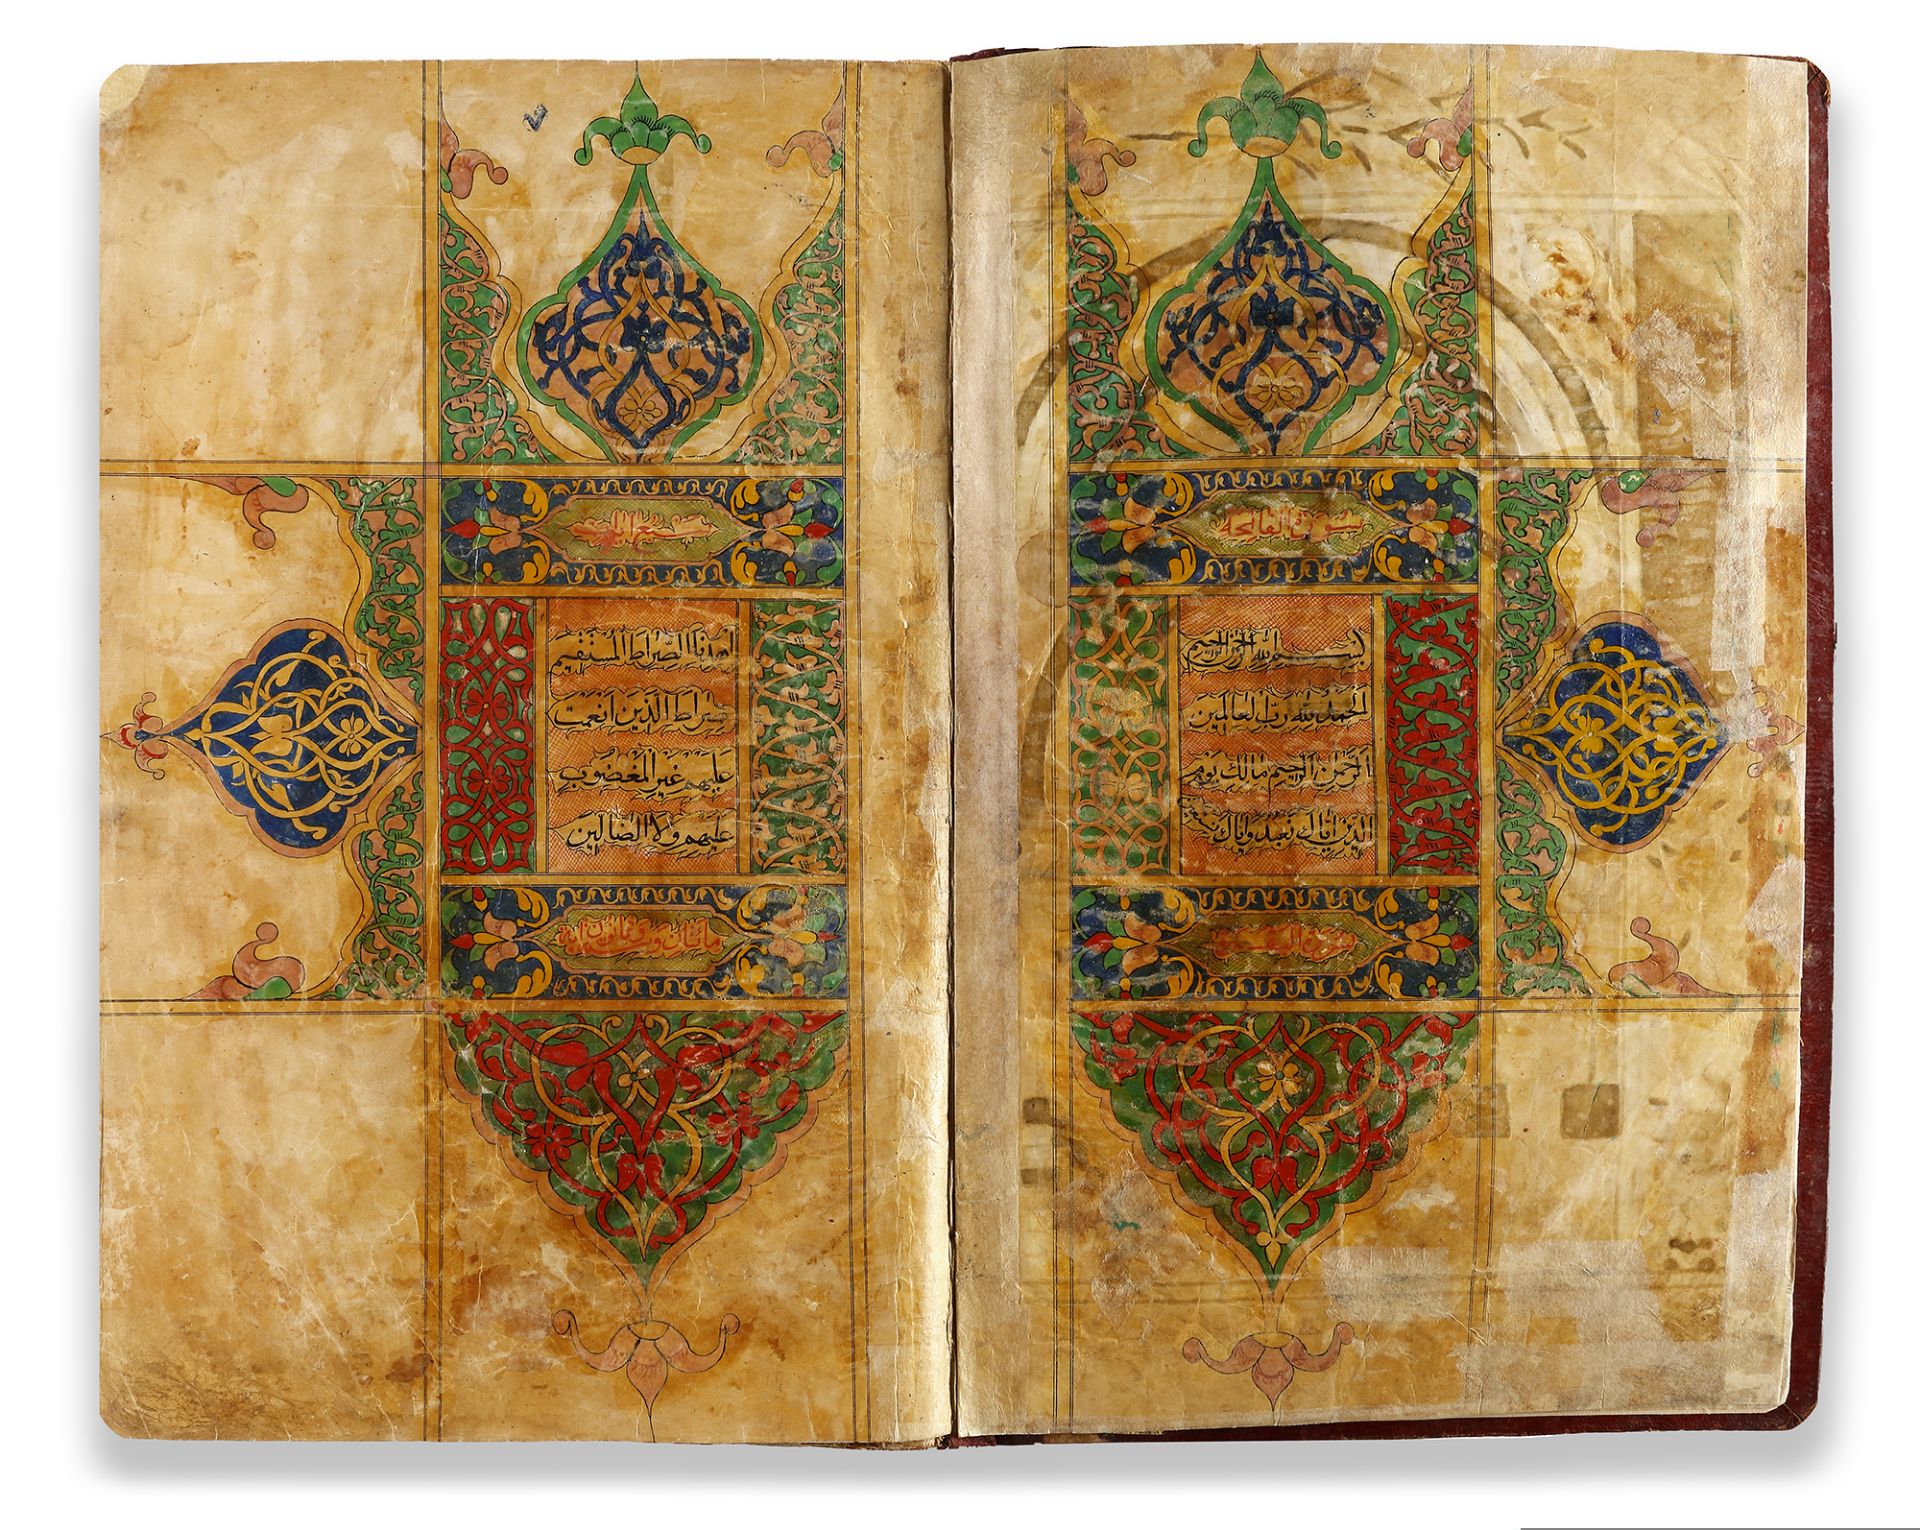 A LARGE QURAN, CENTRAL-ASIA, DAGESTAN, BY MUHHAMAD BIN KHEDR AL-KESHANI IN 1195 AH/1780 AD - Image 4 of 9